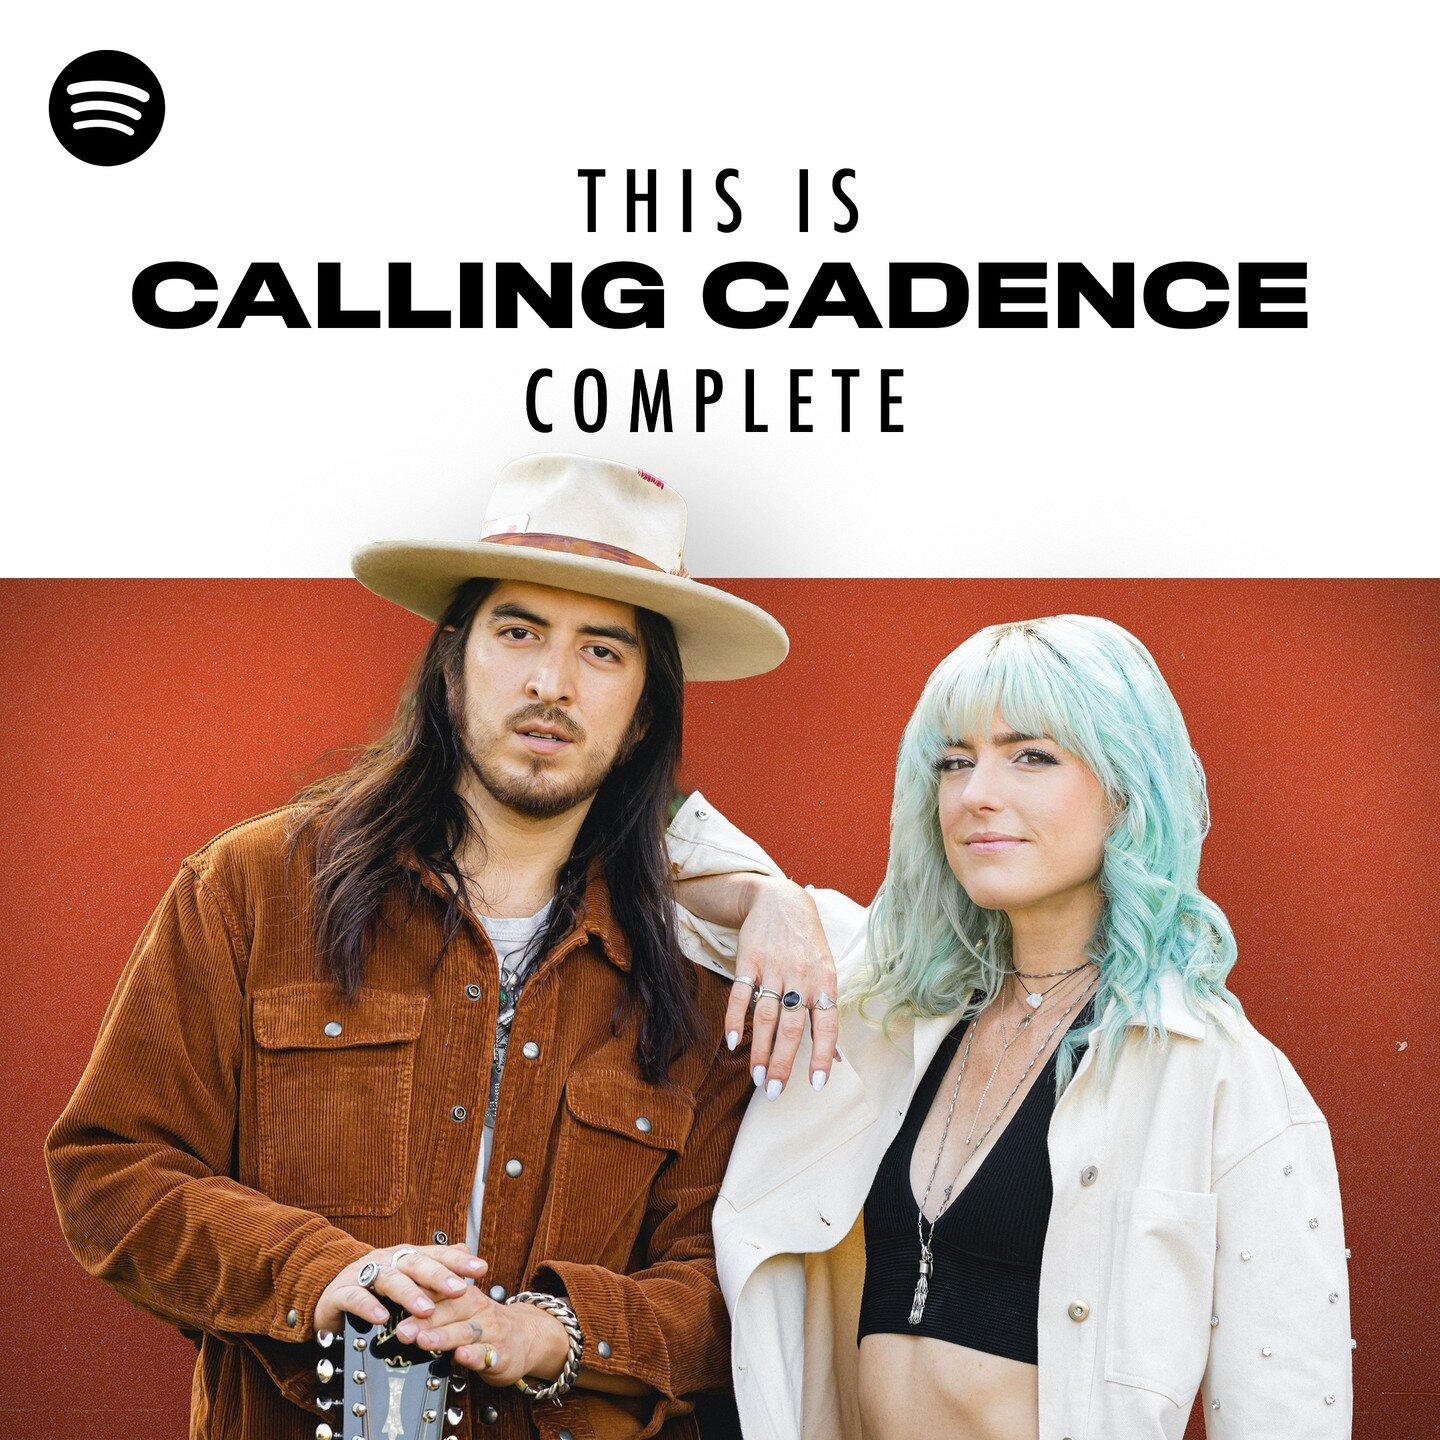 Calling all @Spotify users, we made a cheeky playlist with all the #CallingCadence classics together in one place (that we will be updating regularly). Go give it a listen &amp; follow for good luck! Link in bio

#spotify #playlist #musician #voiceso